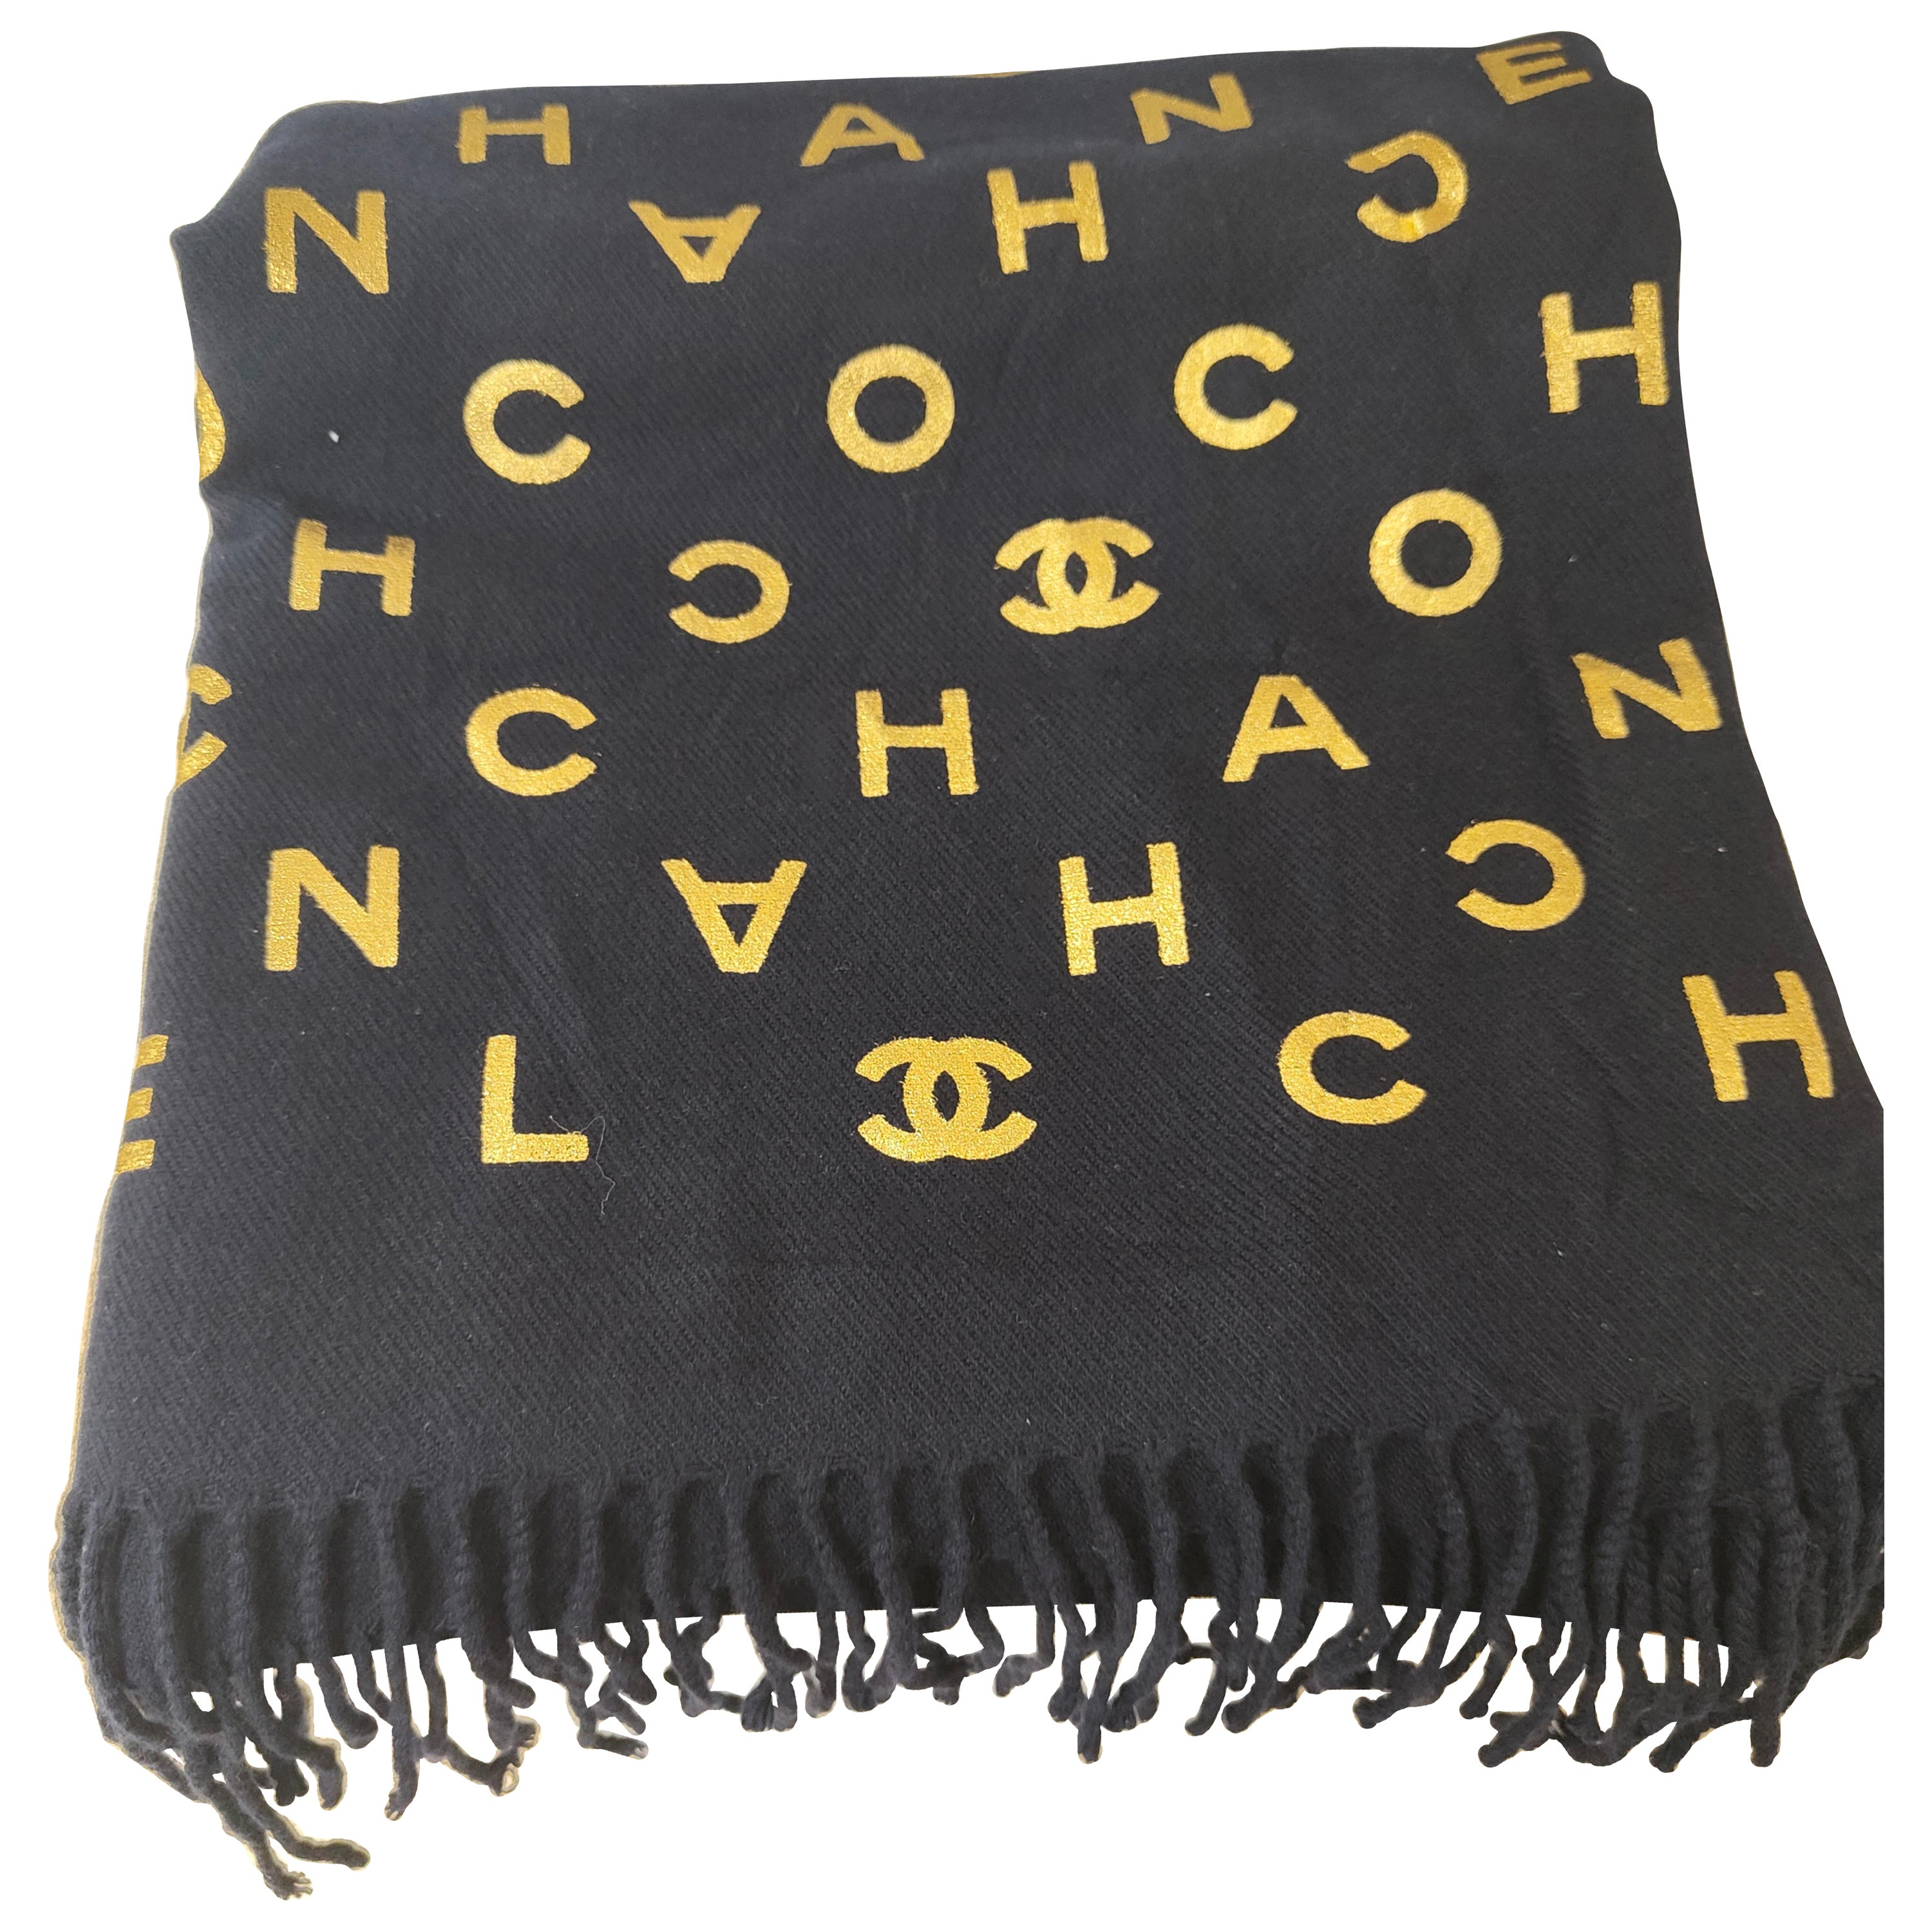 Chanel blue navy gold lettering scarf